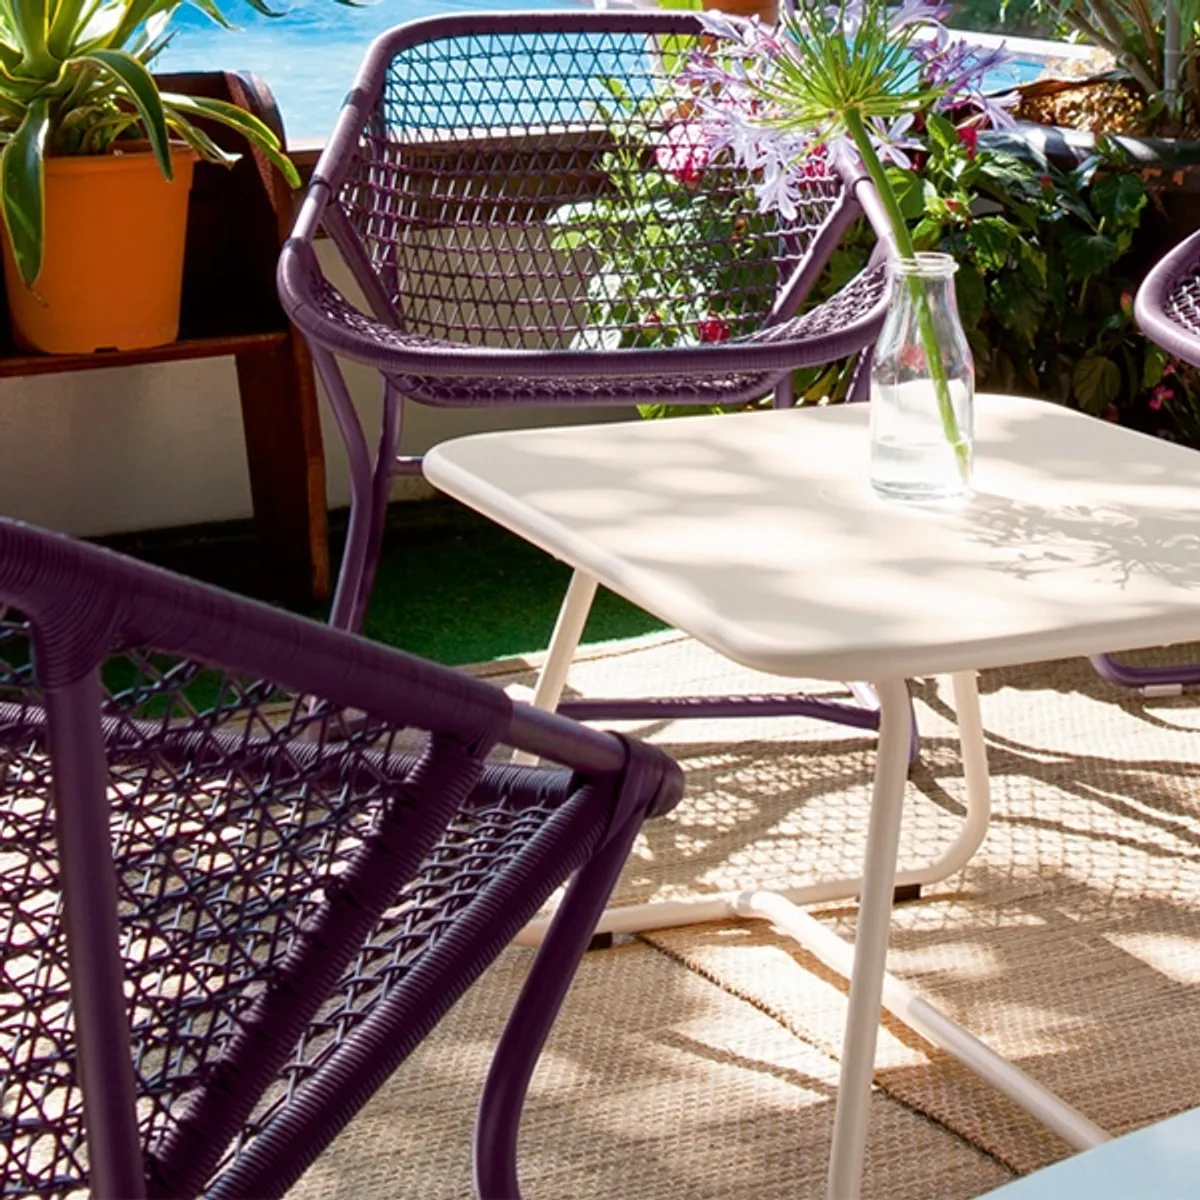 Sixties Outdoor Furniture In Plum Colour